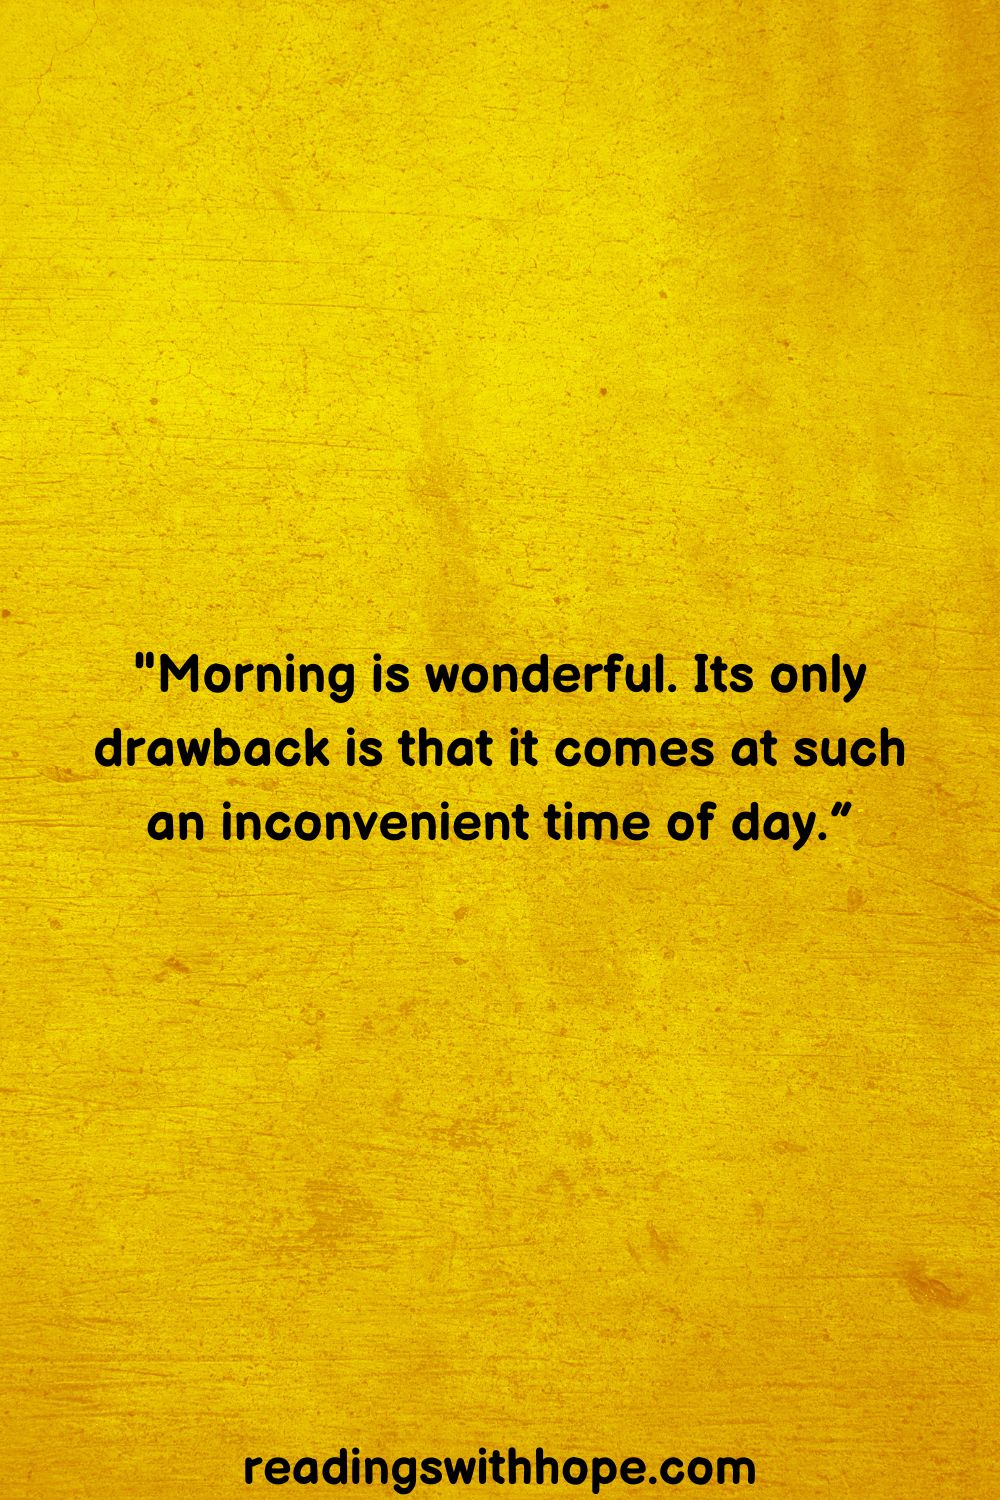 25 Good Morning Quotes To Start Your Day